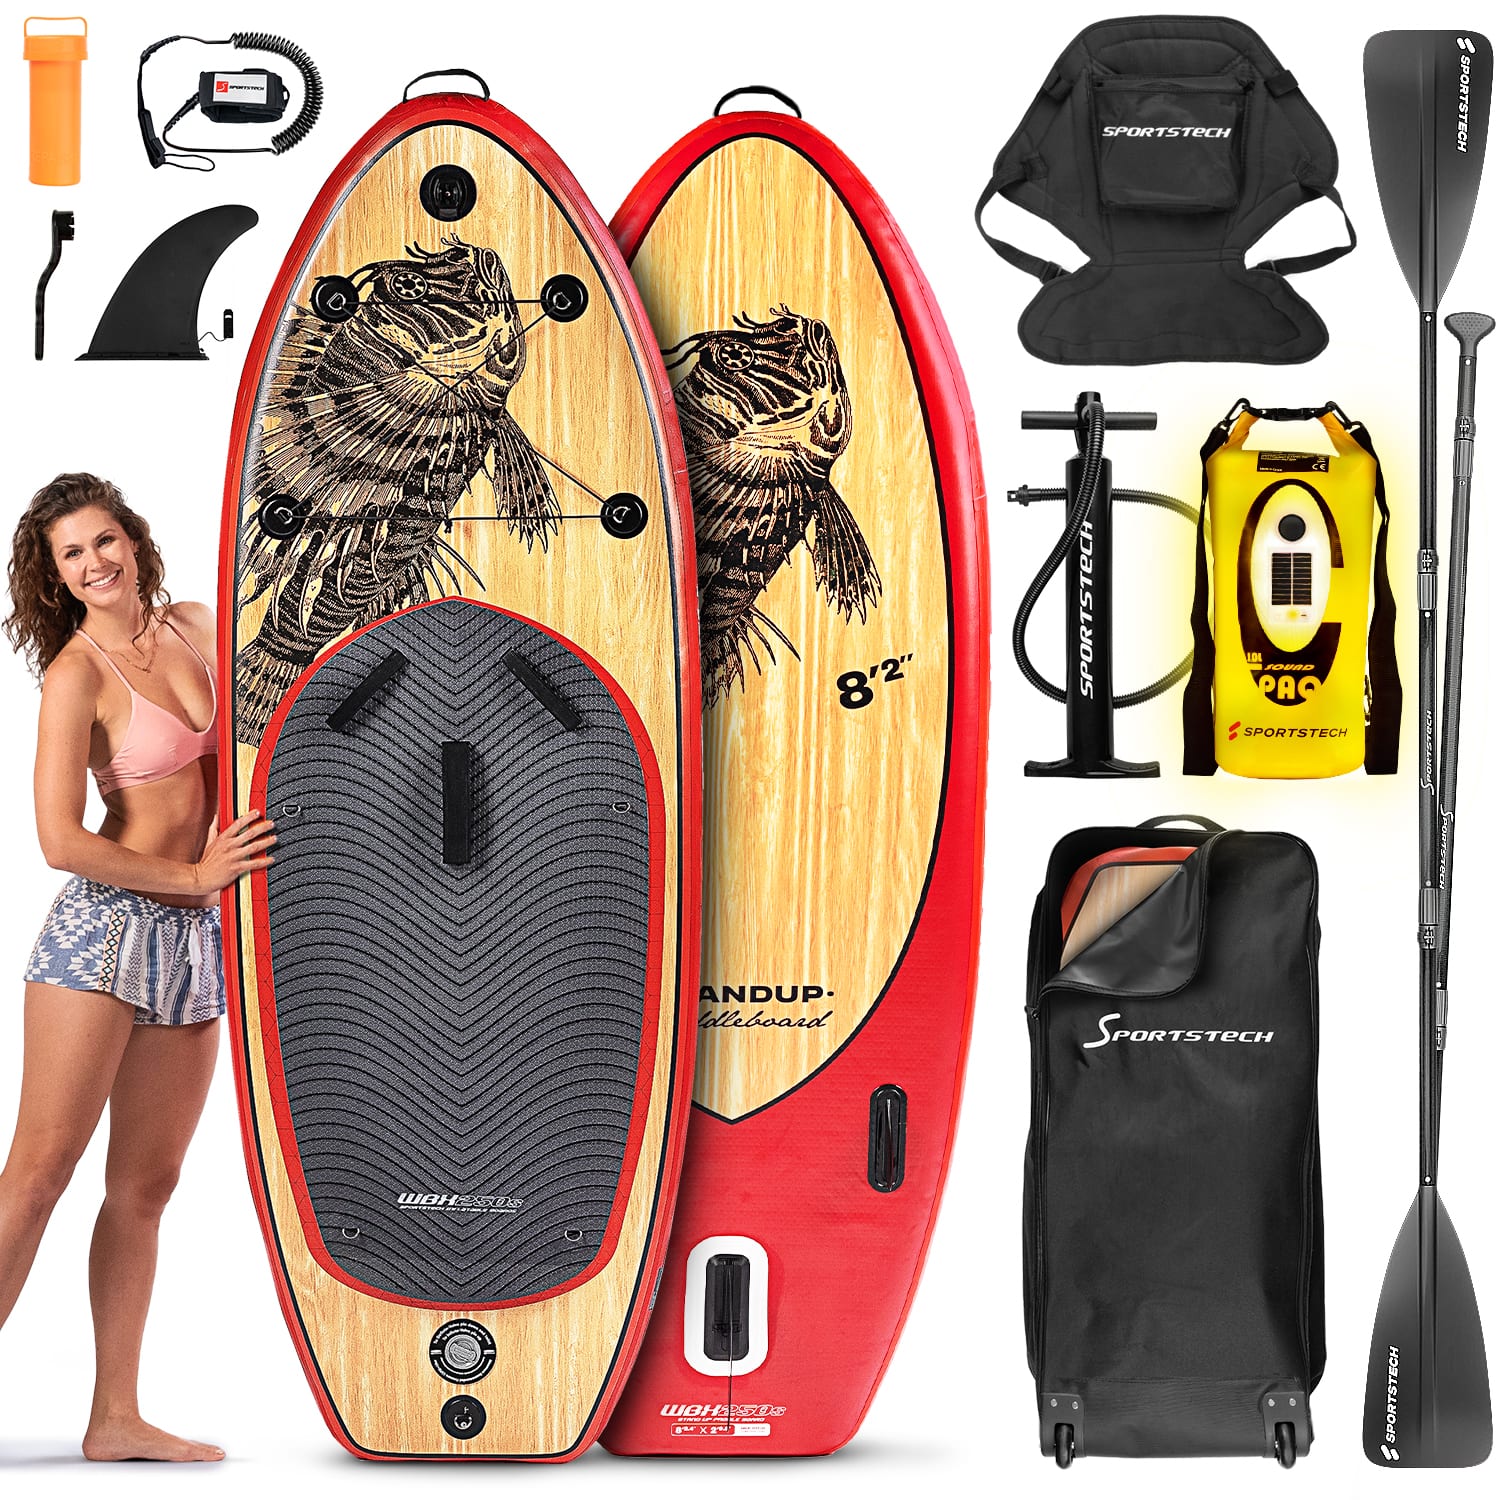 WBXs250 SUP Board